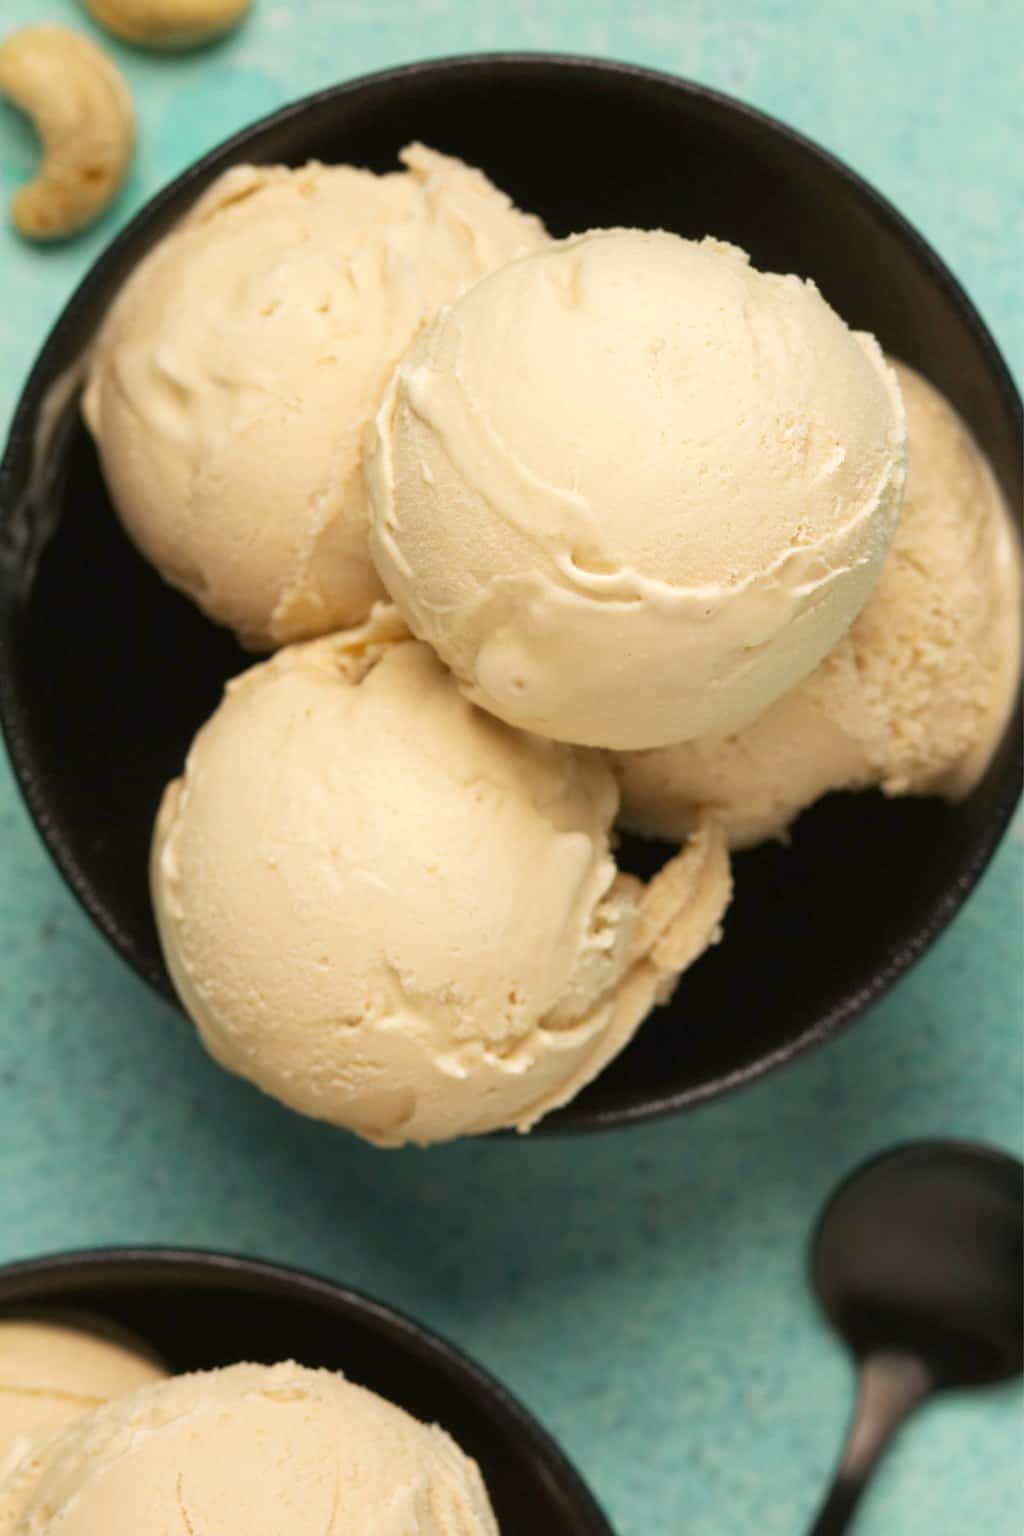 Scoops of cashew ice cream in a black bowl. 